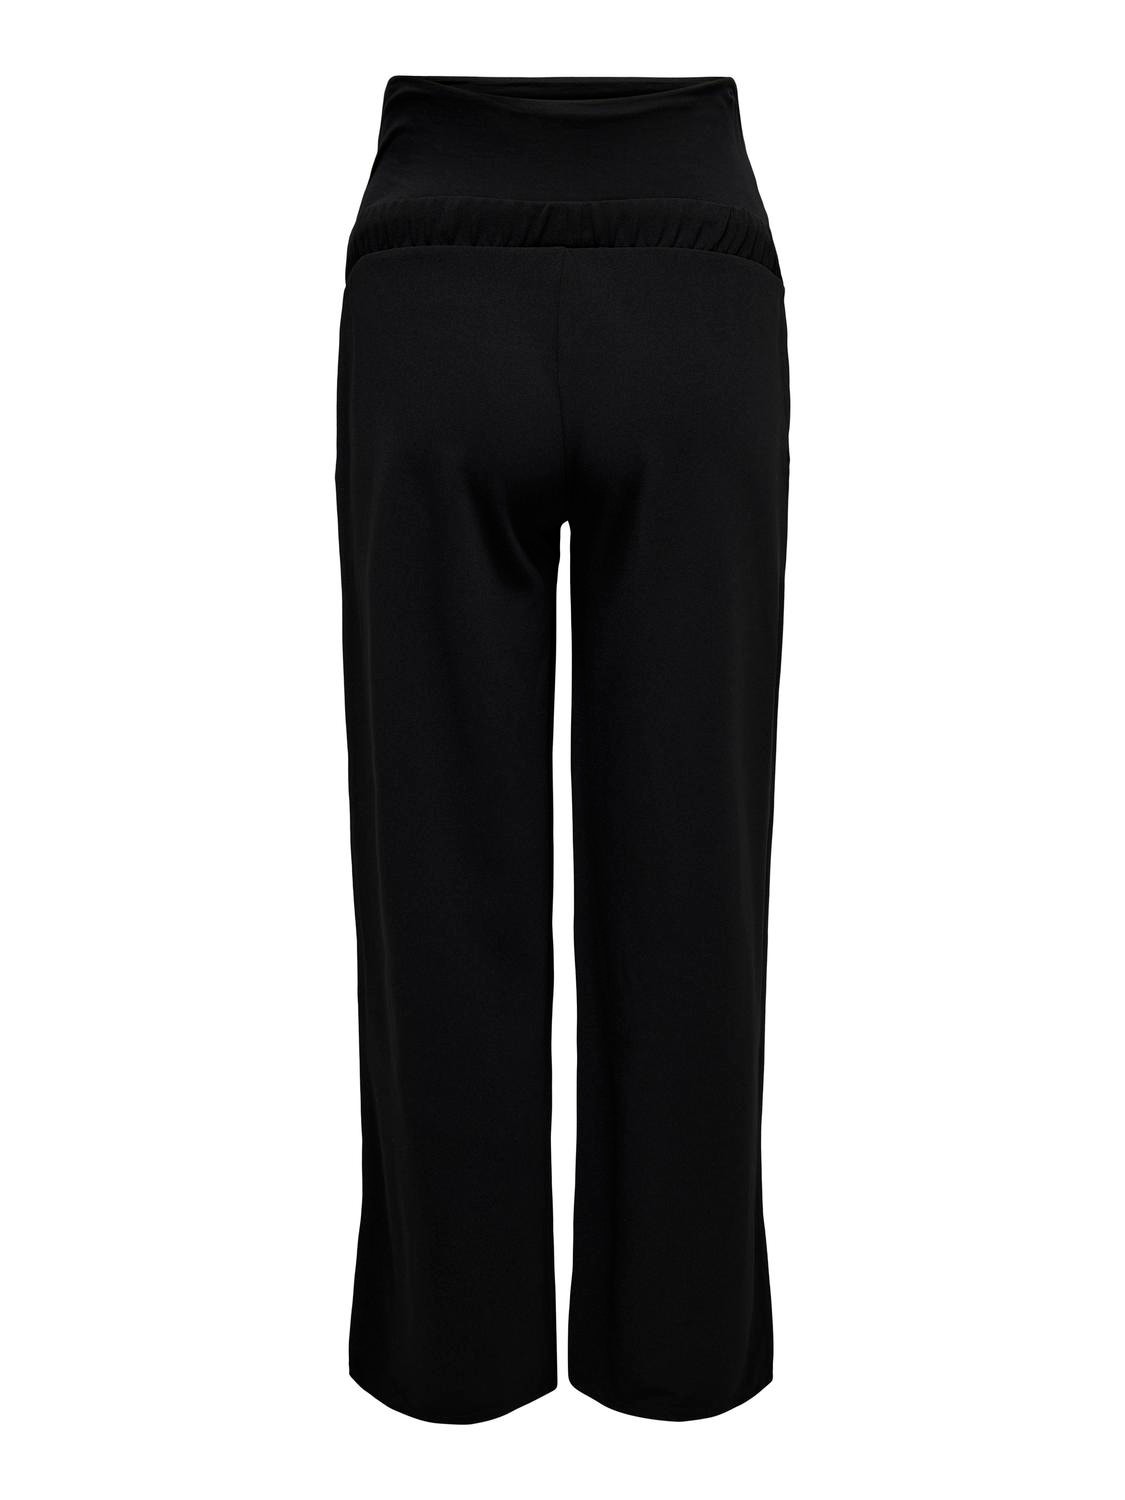 ONLY Regular Fit Maternity Trousers -Black - 15326200